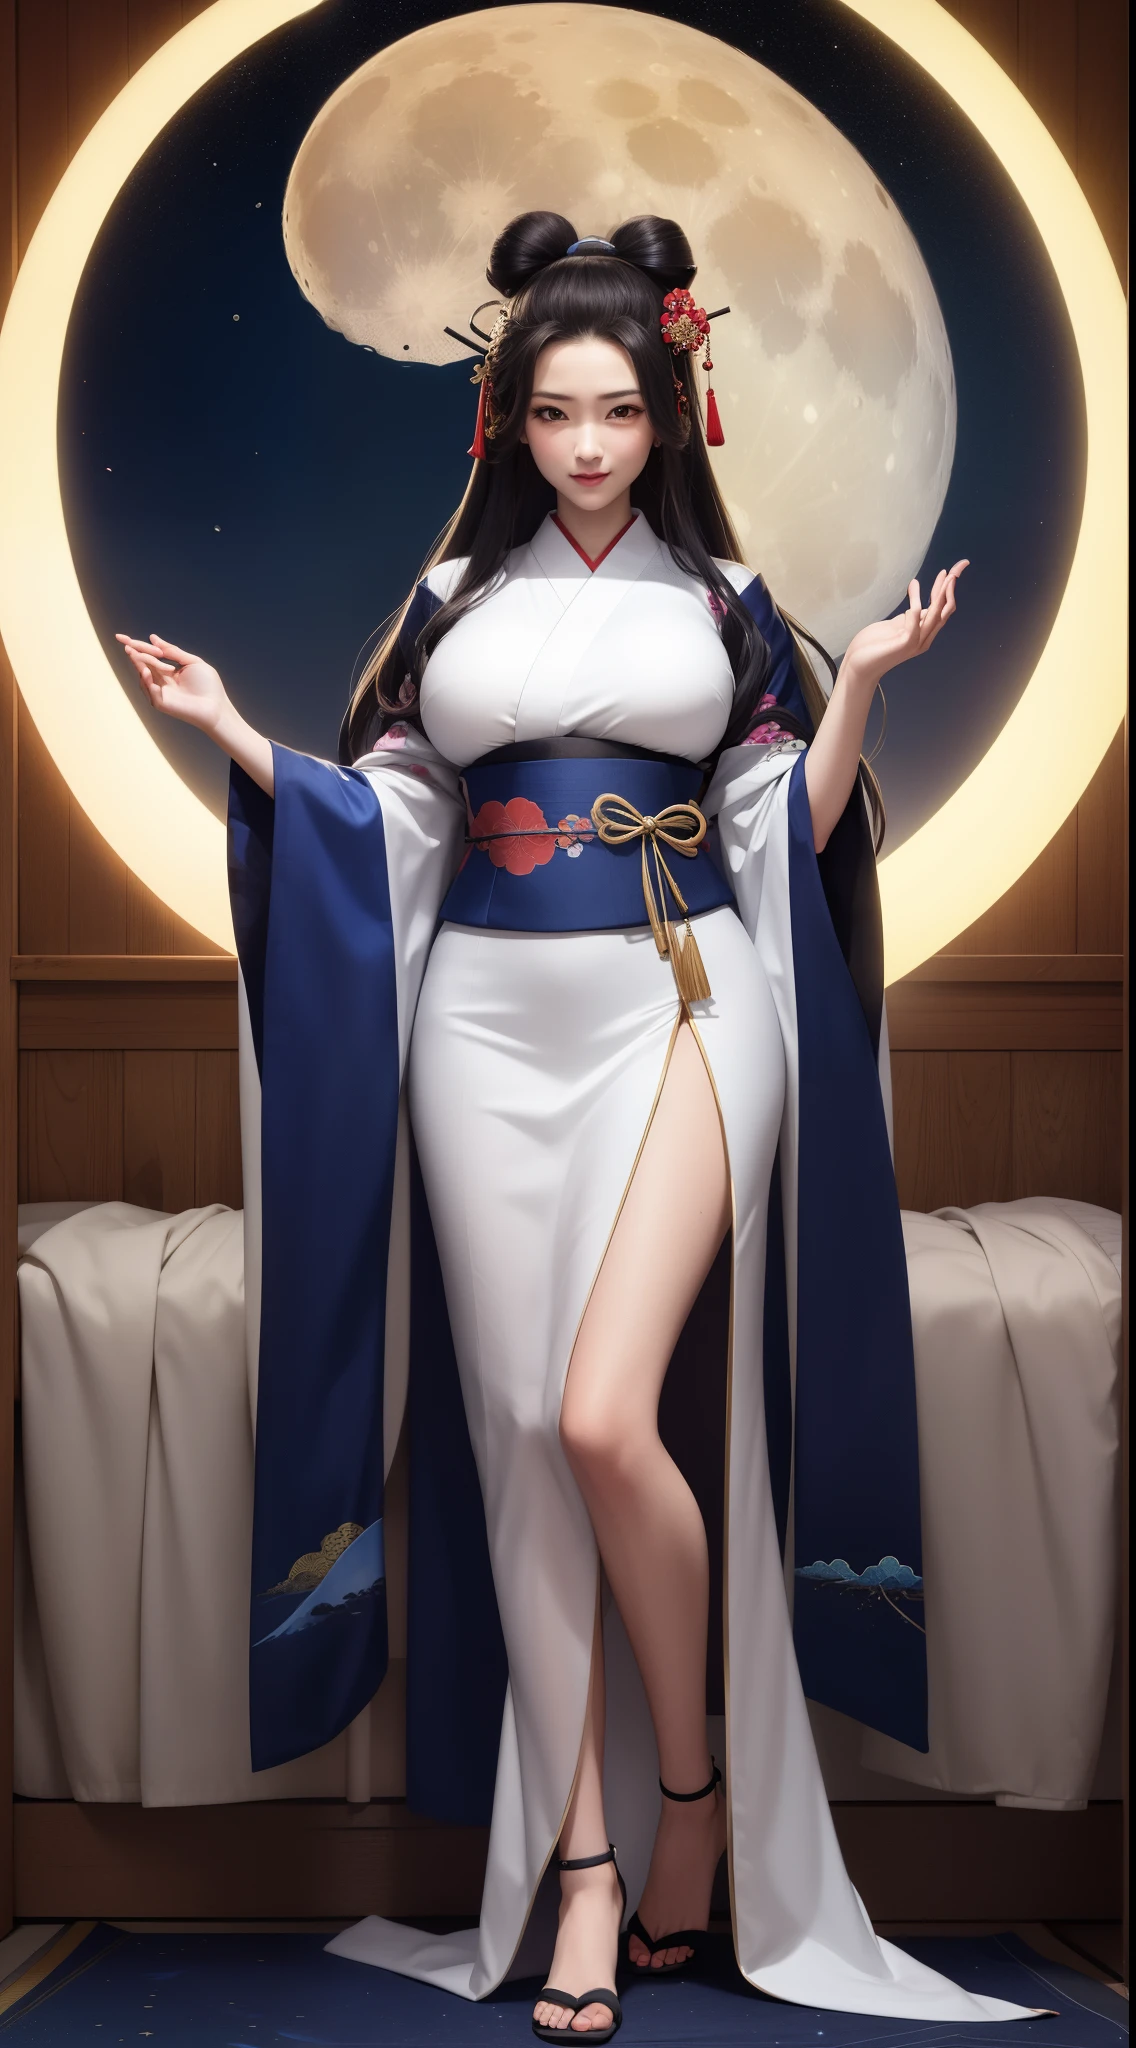 Tsukuyomi, ancient shinto goddess of the moon, long silver hair, long ornate midnight blue and white kimono, (in ukiyo-e style:1.3), large moon background, (full body portrait), ethereal, mysterious, eerie, divine, godly, powerful, breathtaking, masterpiece, artful, delicate, soul, complex background, gorgeous, extremely intricate details, smile, big breasts, (yoshitaka amano), (hokusai),